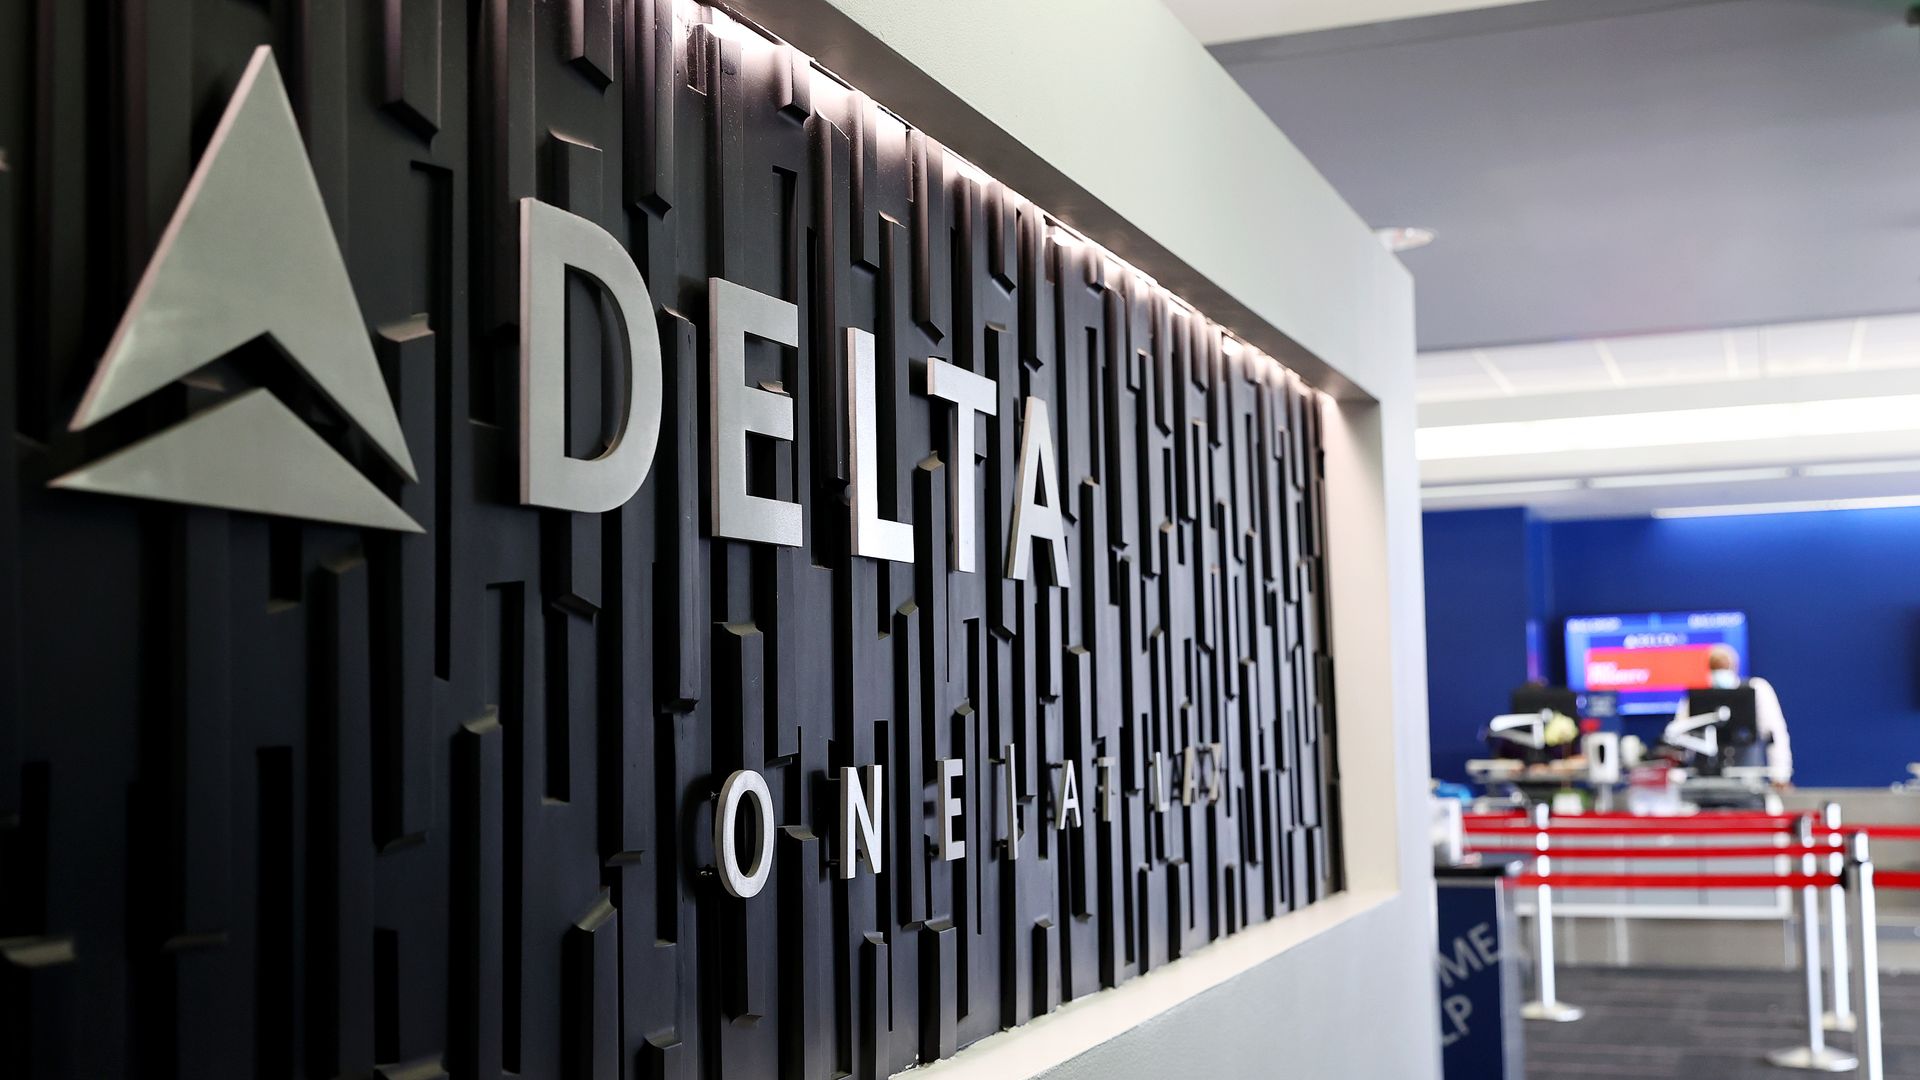 A Delta Air Lines sign is displayed on the departures level at Los Angeles International Airport (LAX) on August 25, 2021.